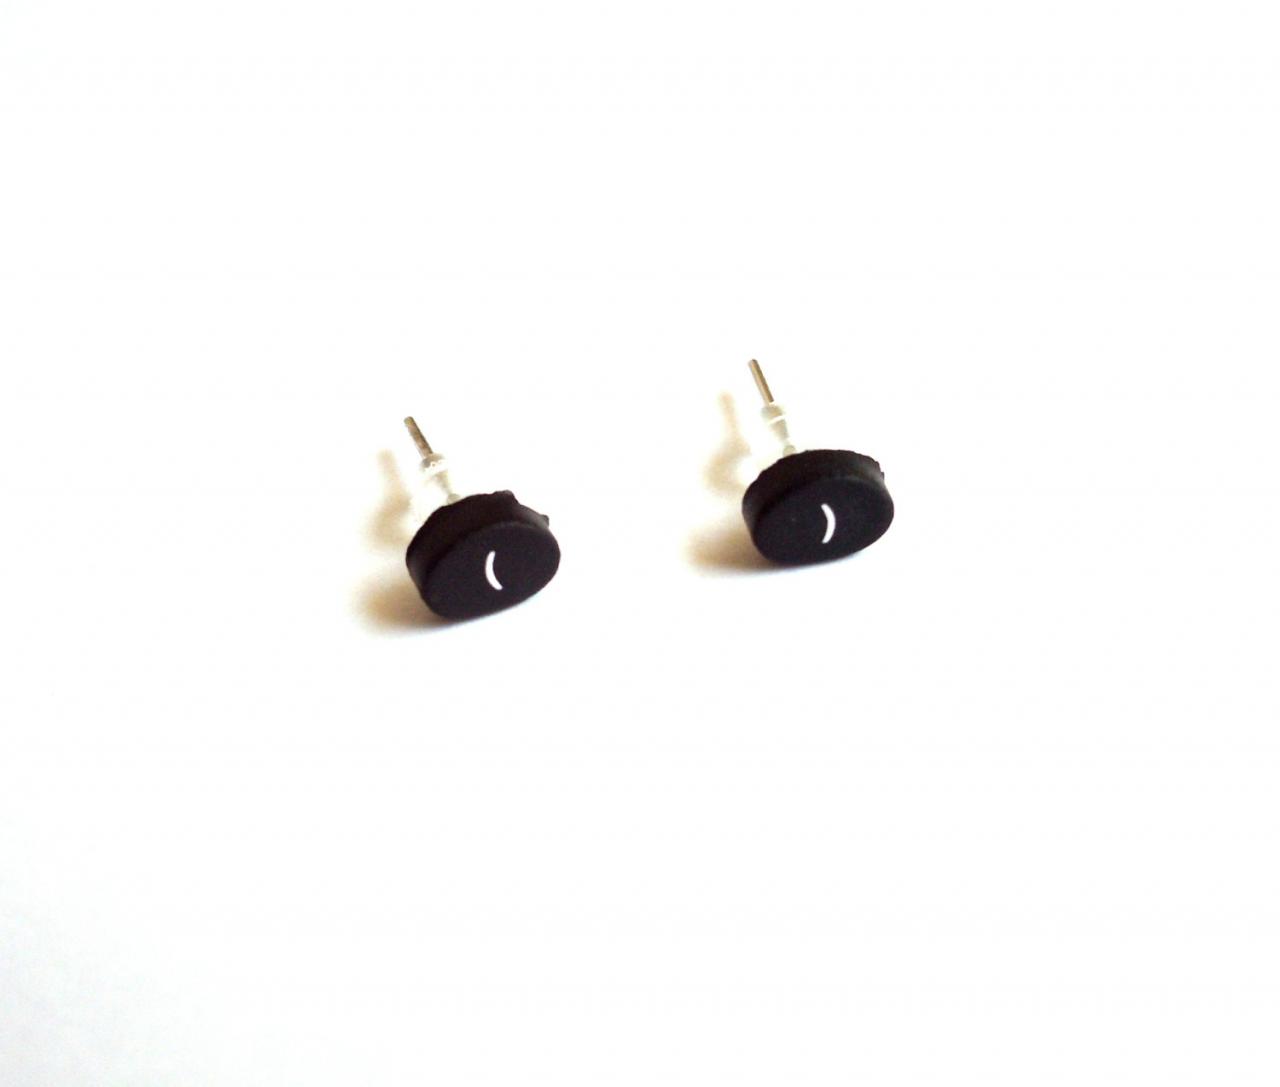 Black Studs Earrings Made Of Recycled Calculator Buttons, Minimalist Tech Jewelry For Geeks, Nerds And Math Lovers